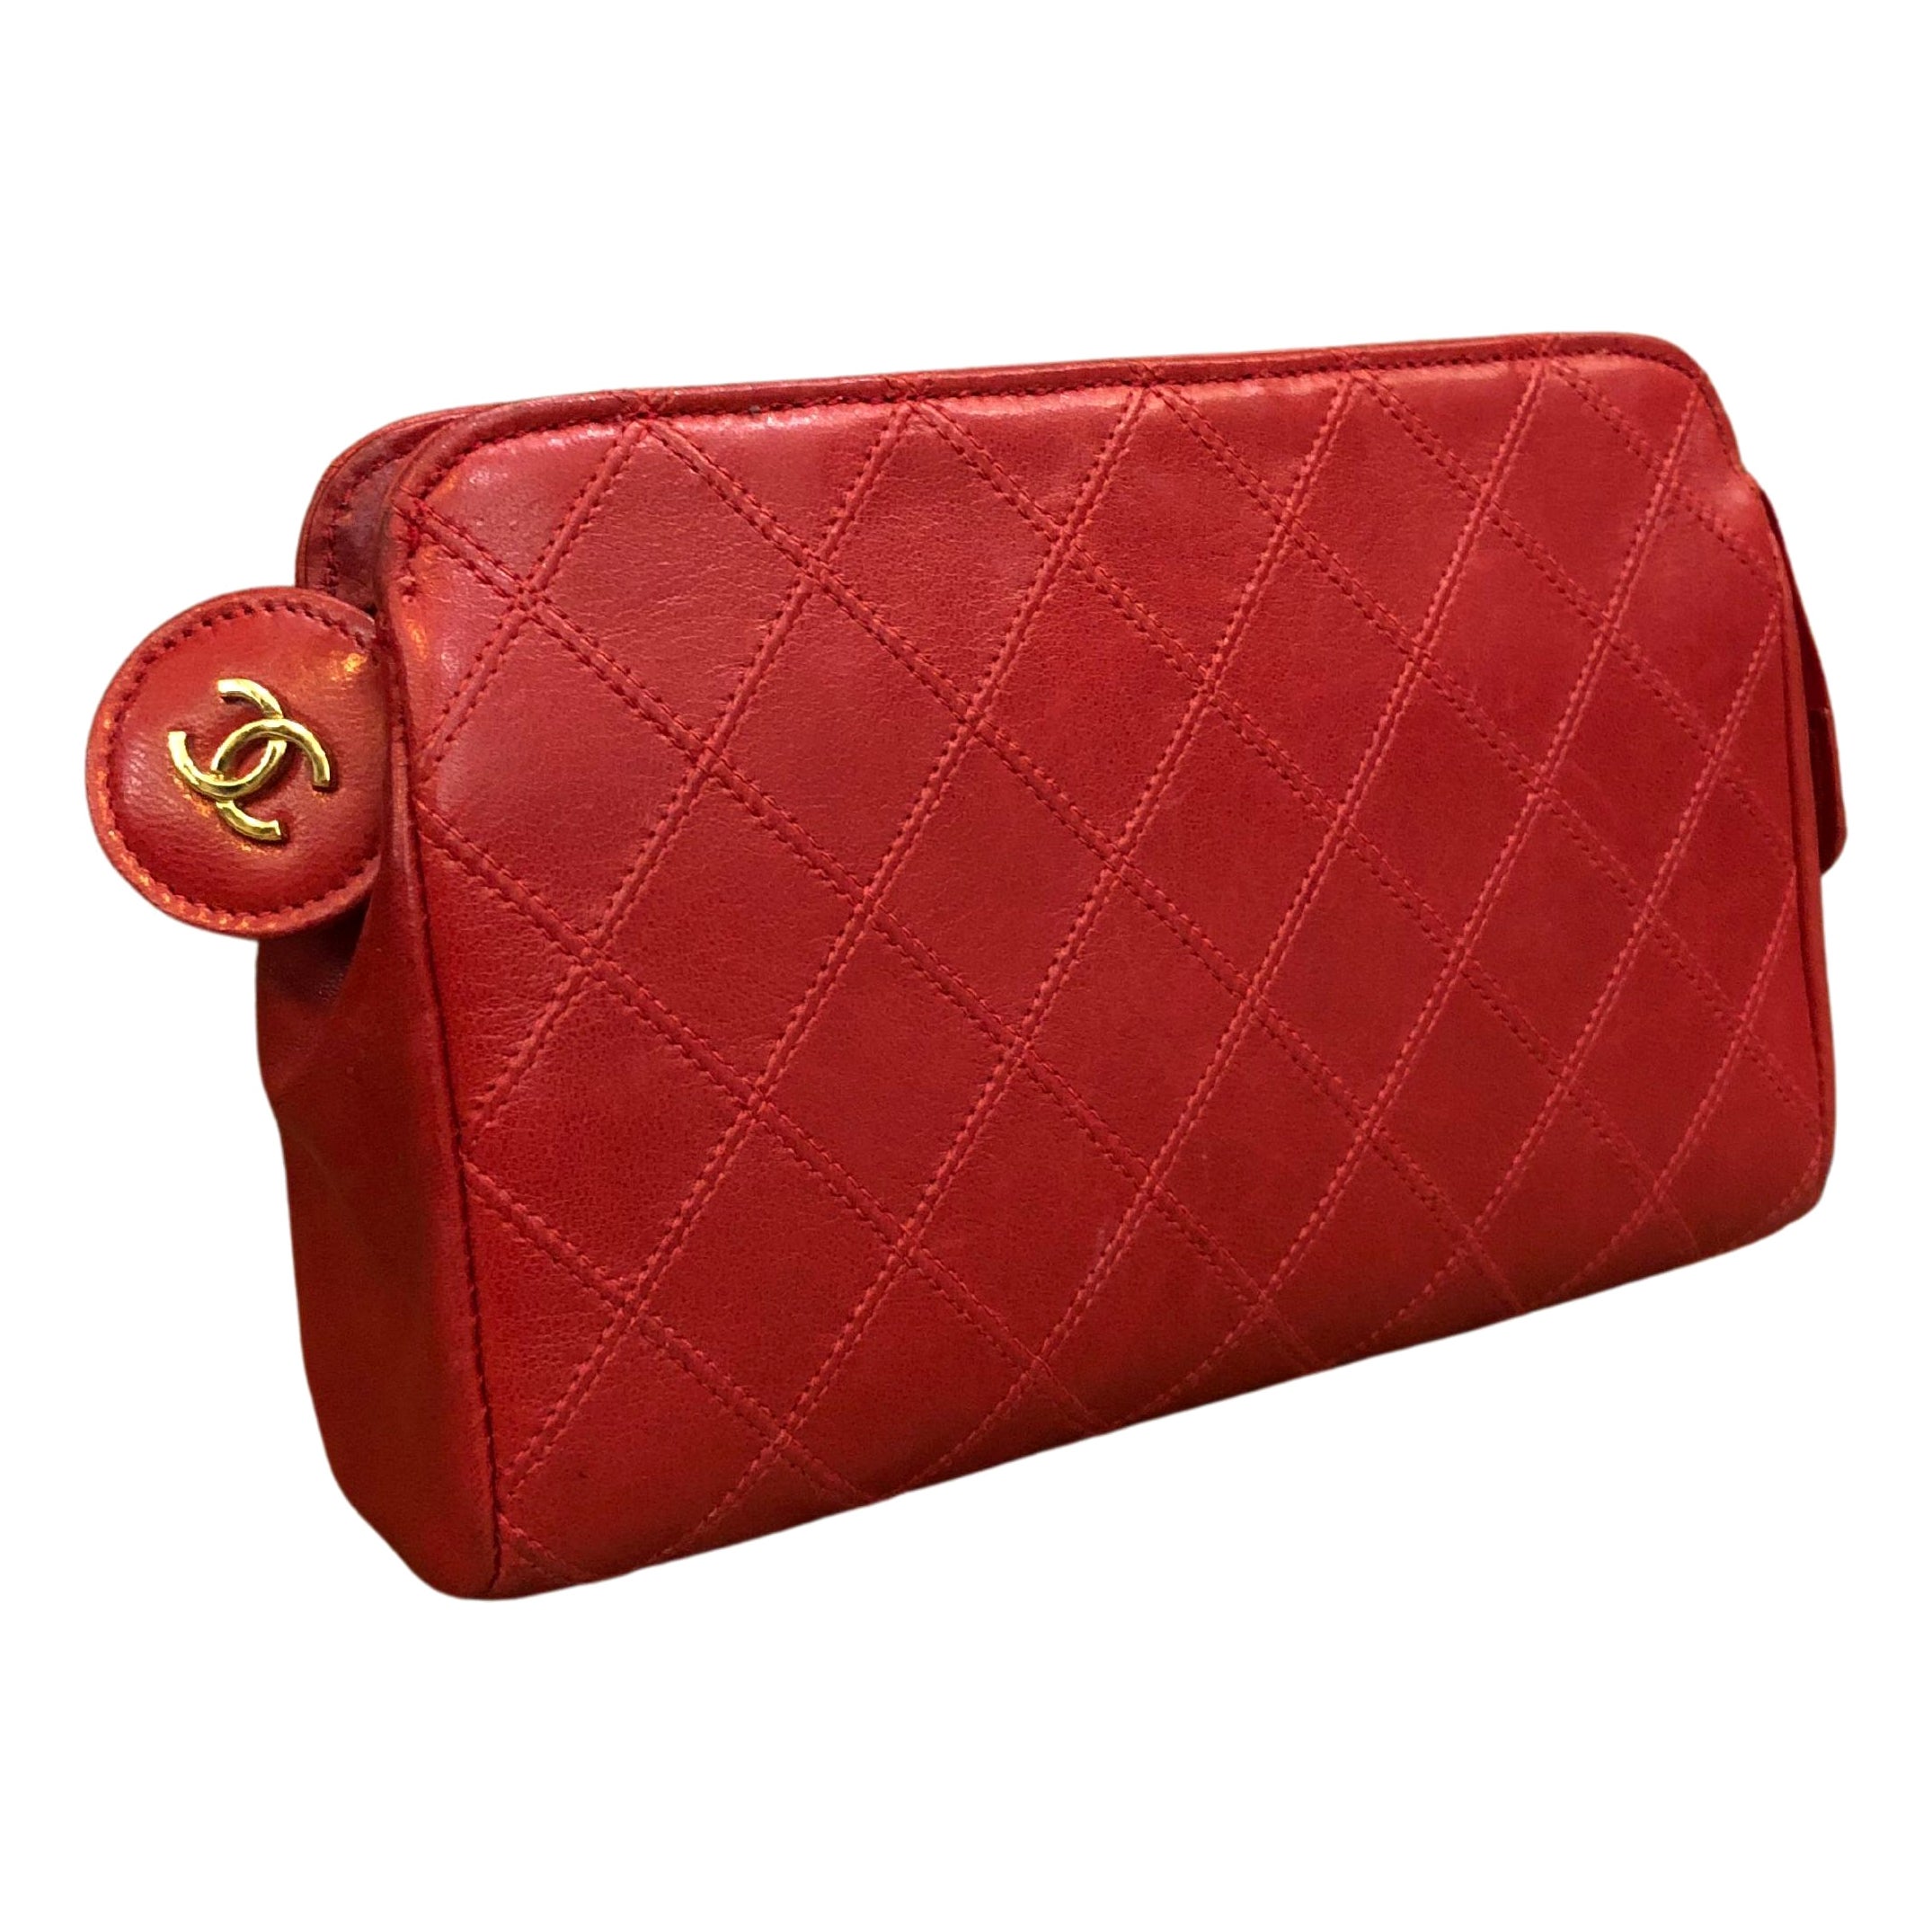 Vintage CHANEL Diamond Quilted Lambskin Leather Pouch Bag Clutch Red (Altered)